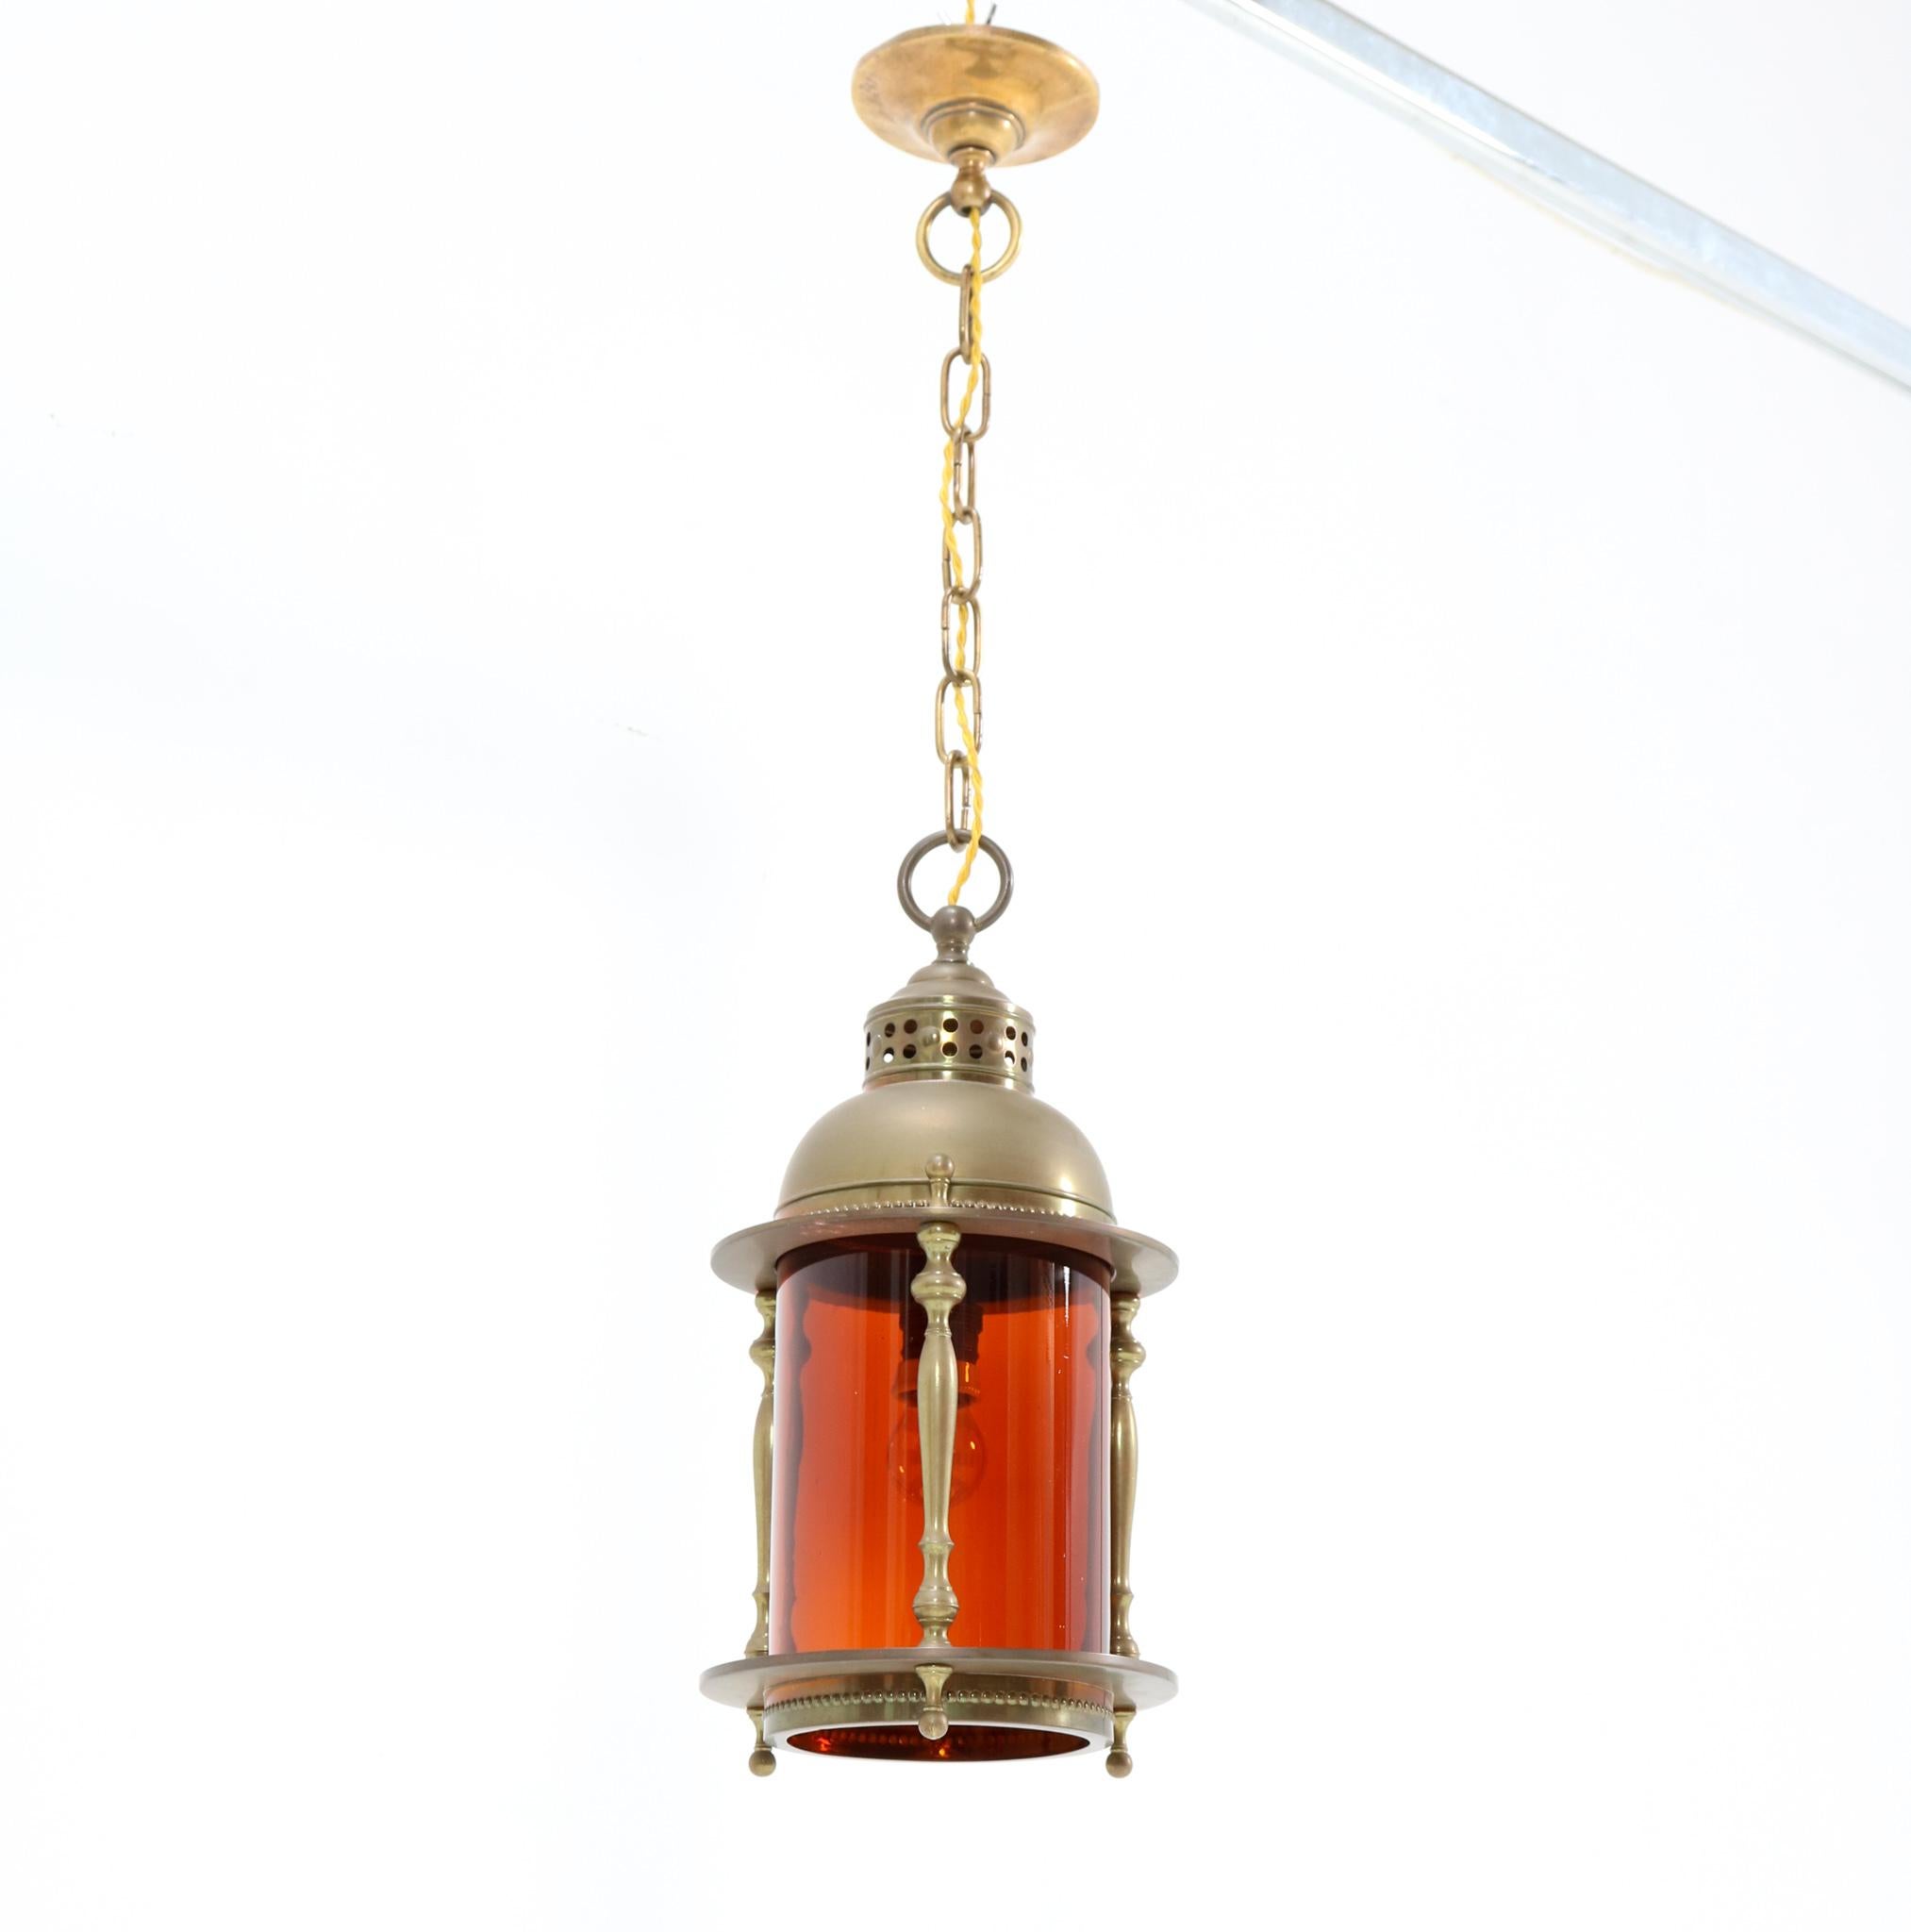 Dutch Patinated Brass Art Nouveau Lantern with Original Glass Shade, 1900s For Sale